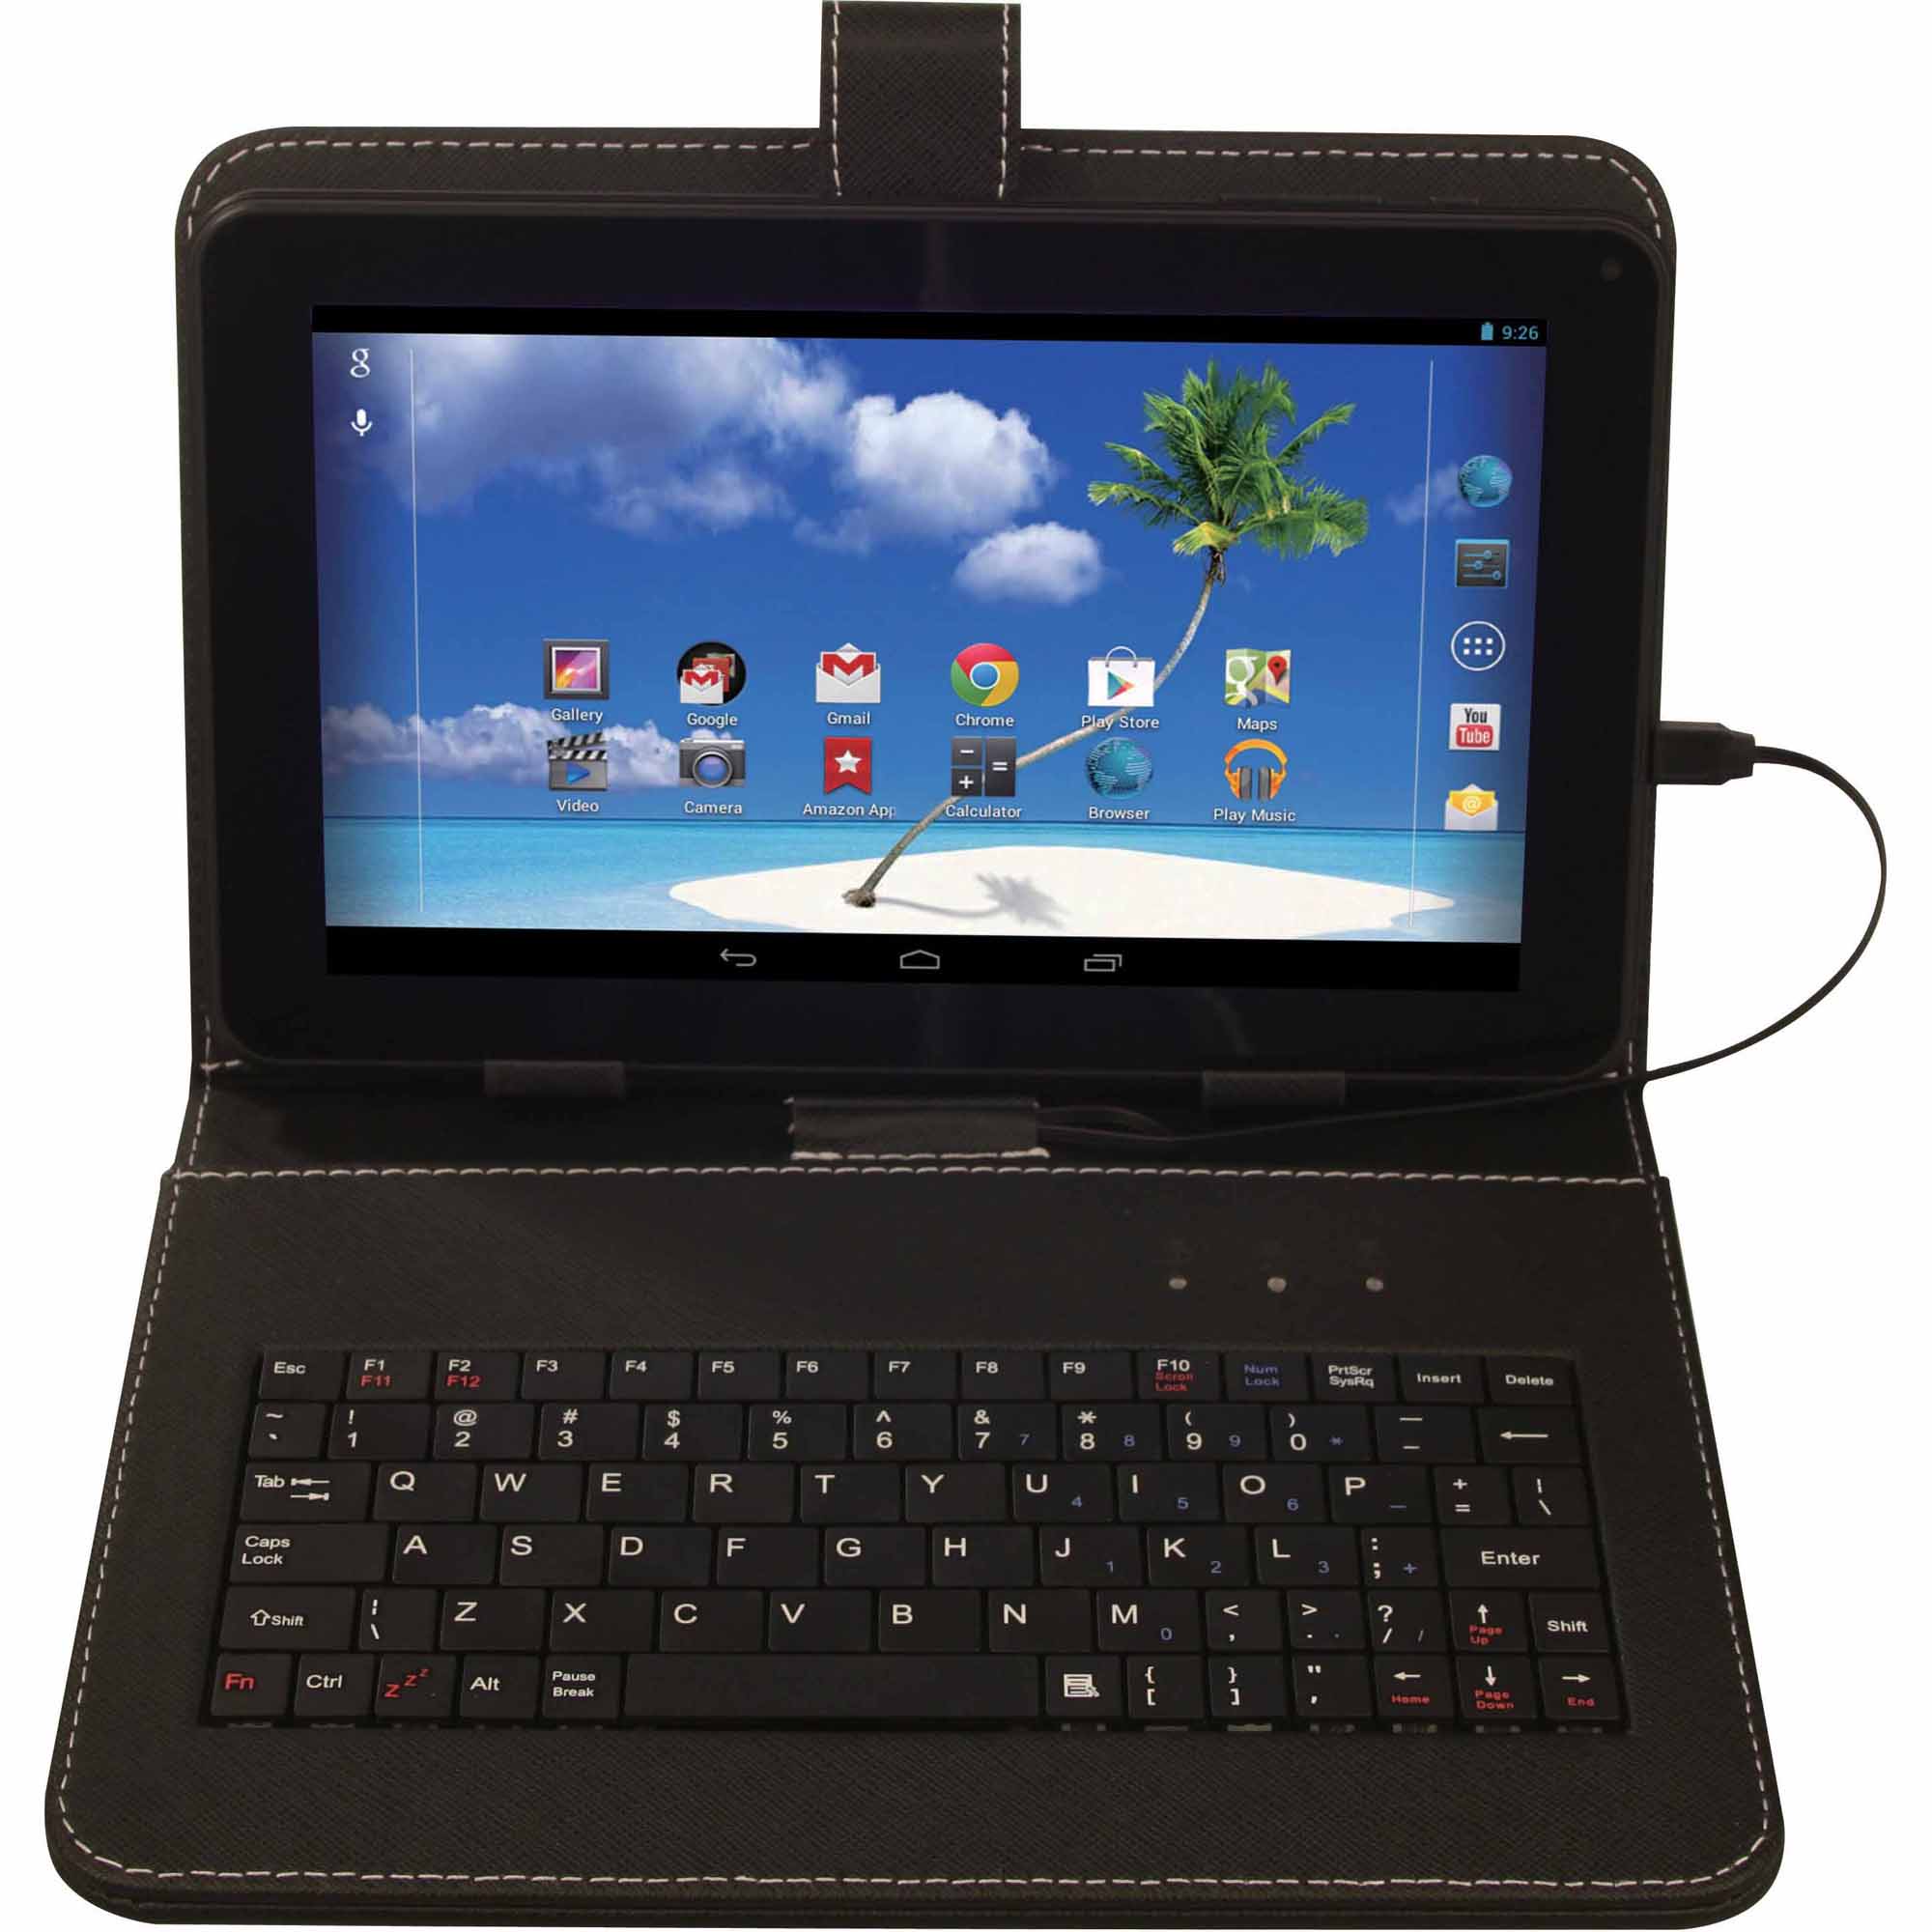 Proscan Android 4.4 9″ Internet Tablet with 8 GB and Keyboard Case—$44.99!